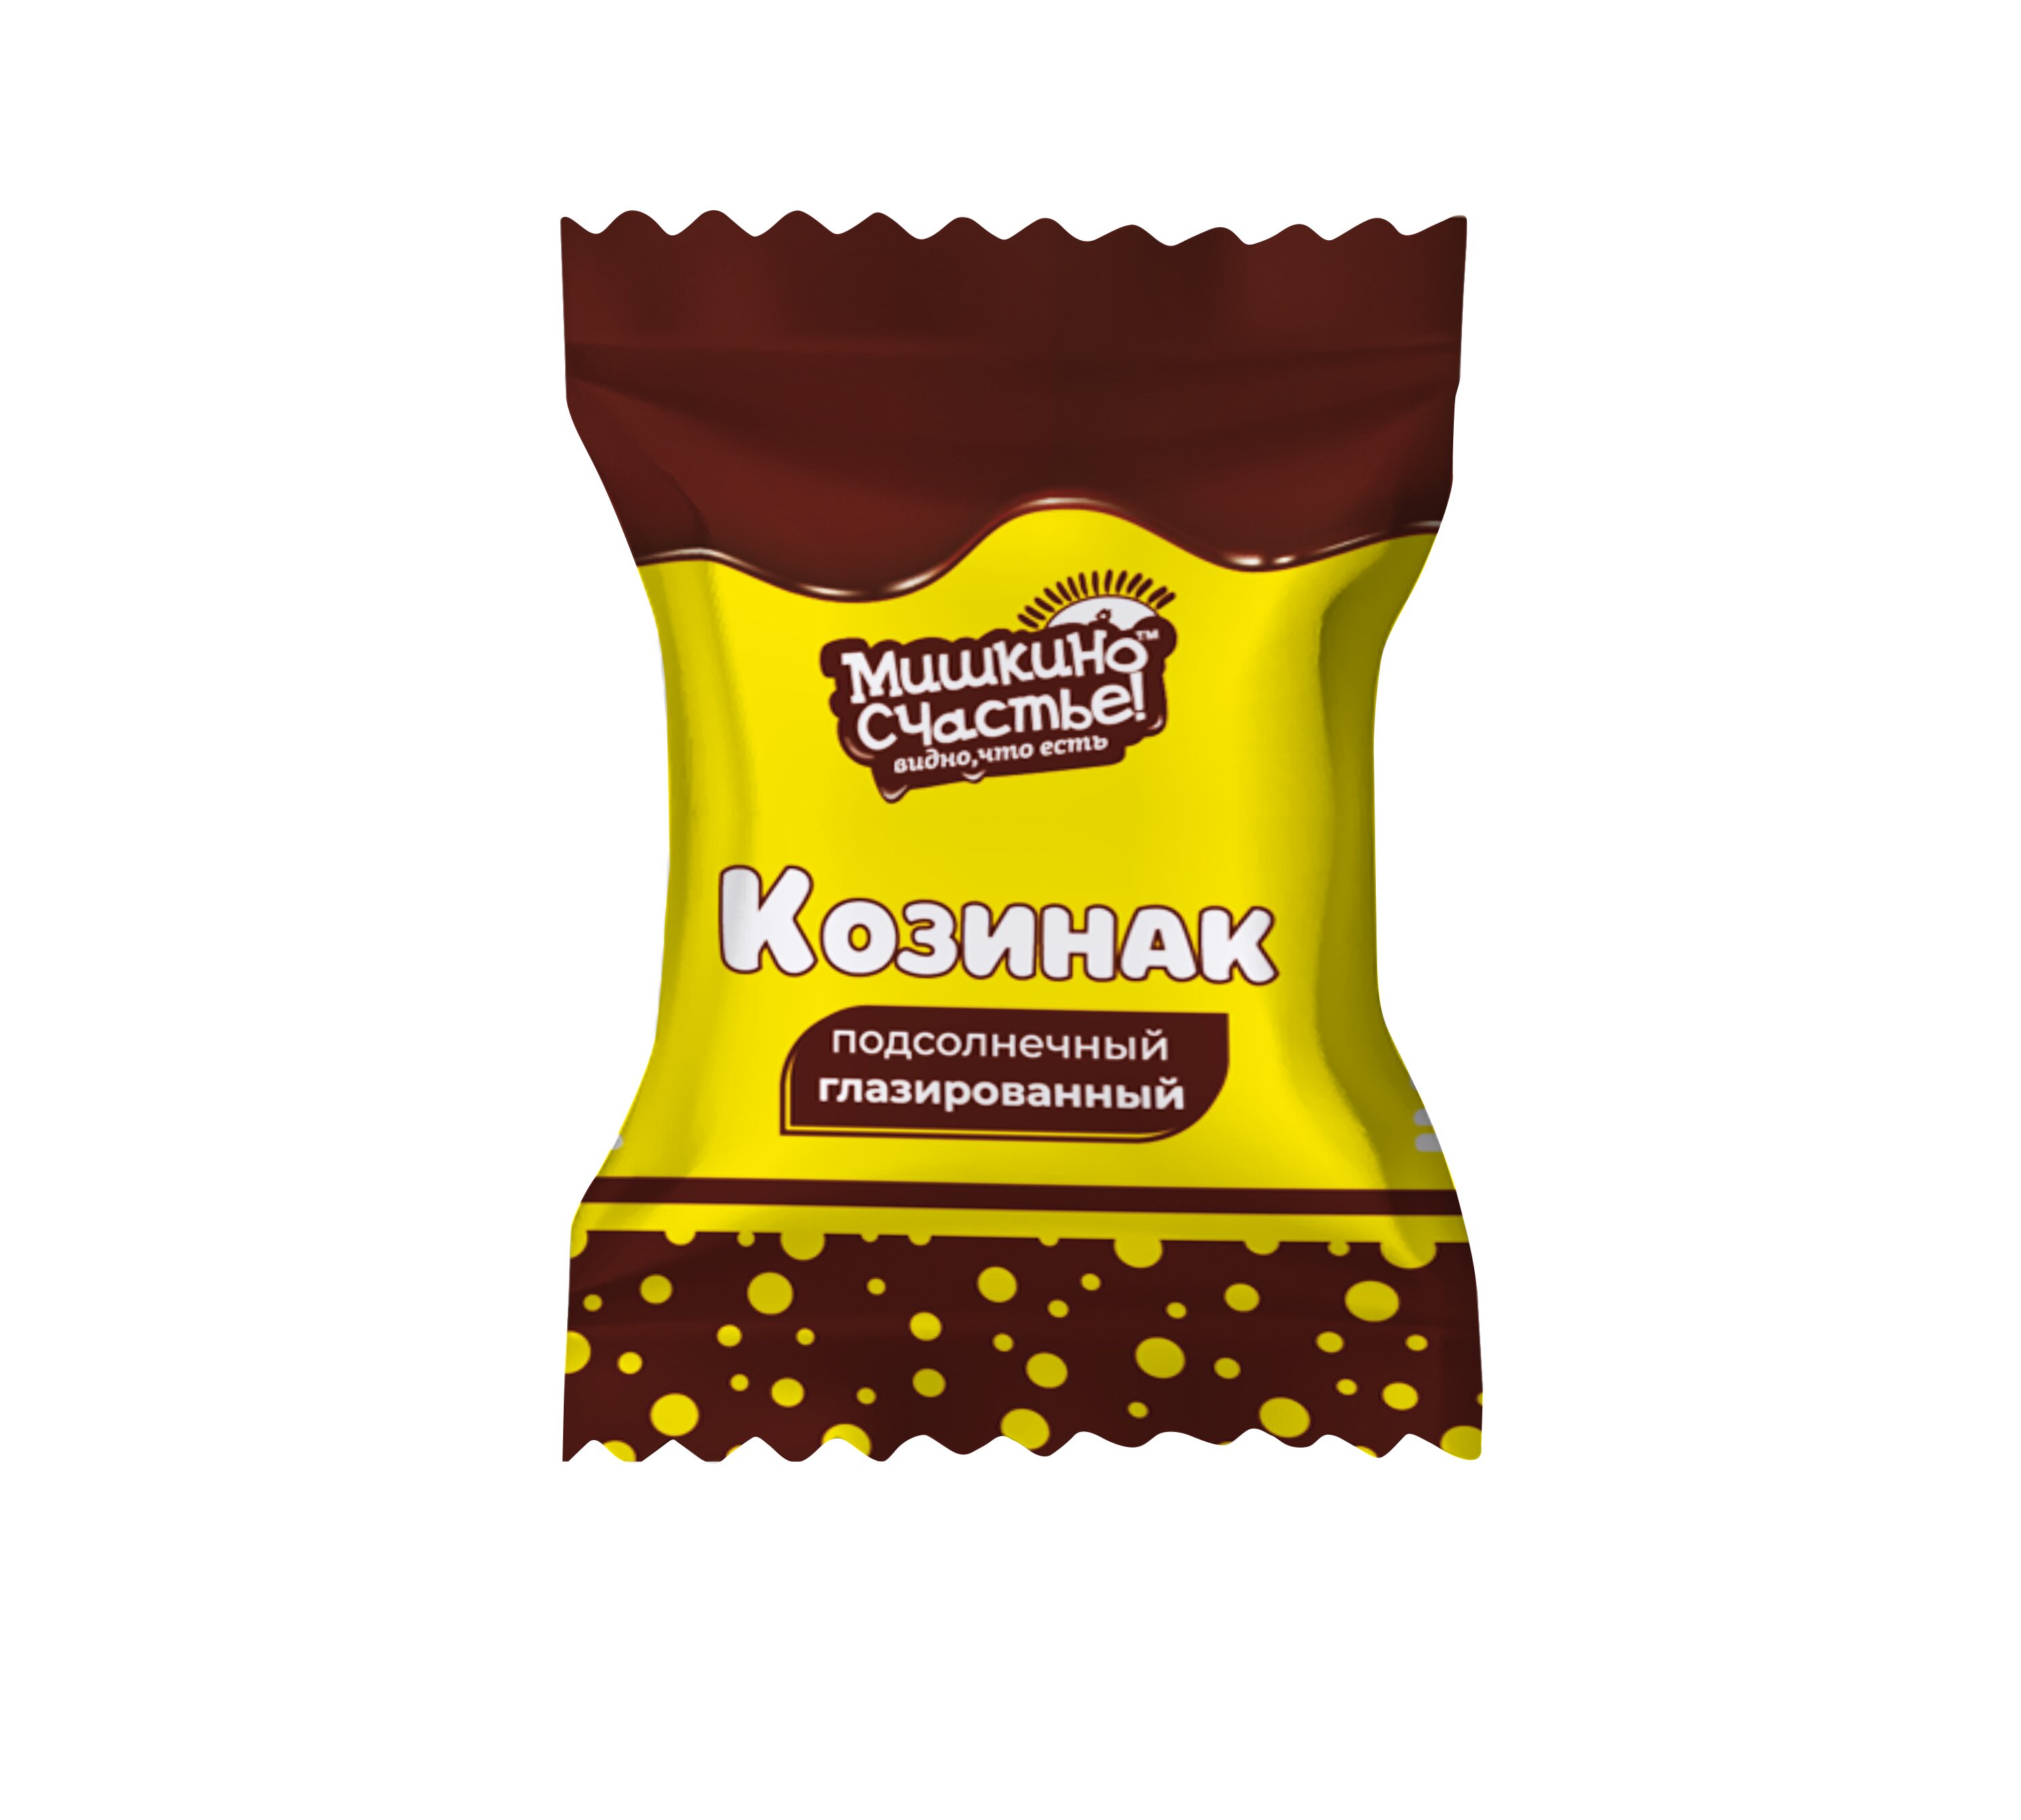 Sunflower brittle sweets covered with glaze "Mishkino happiness" 3 kg.